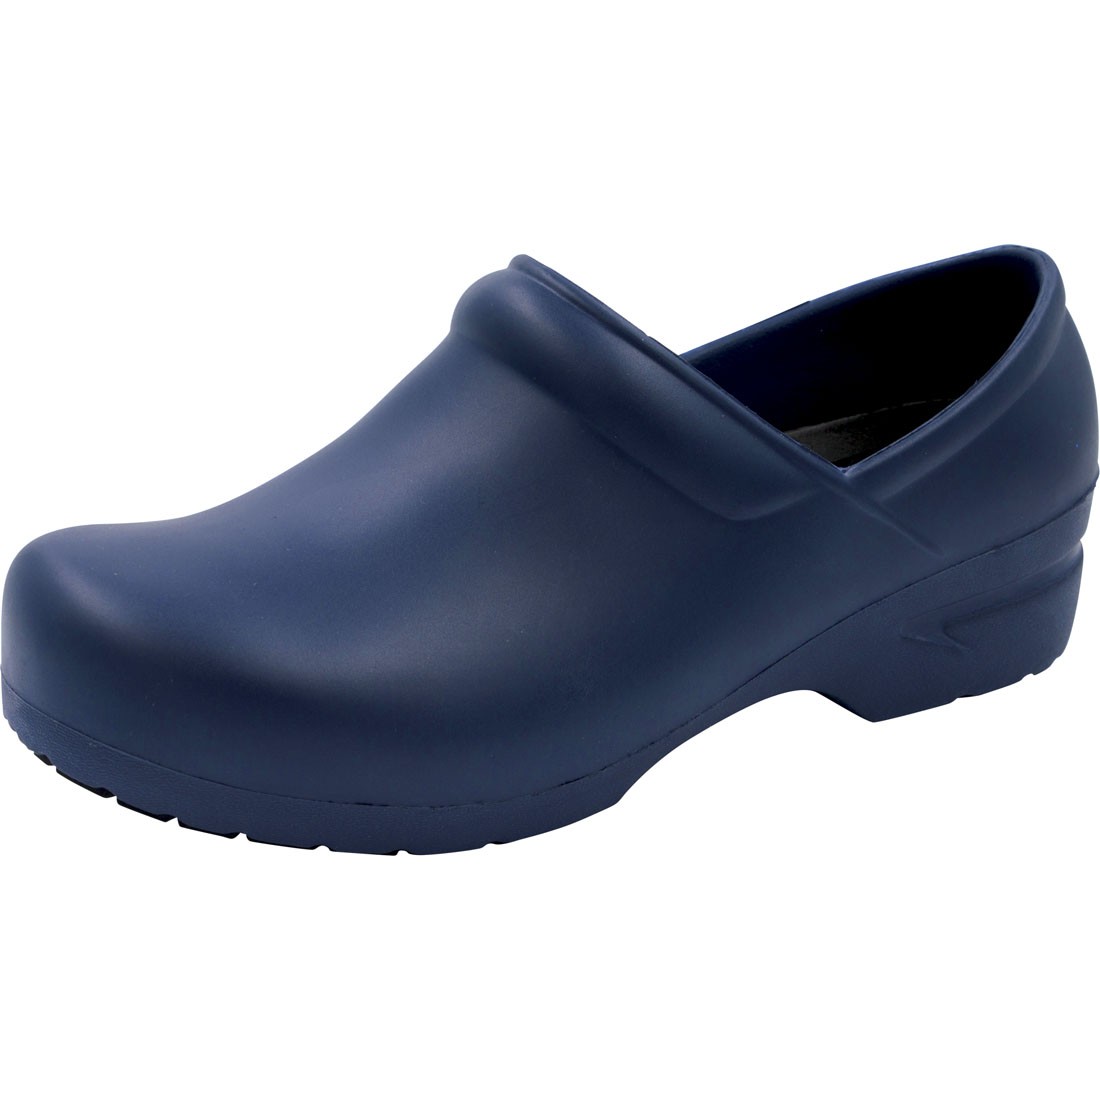 Picture of Anywear Guardianangel Nvy 6 Guardianangel - protective Plastic Stepin, Navy - Size 6